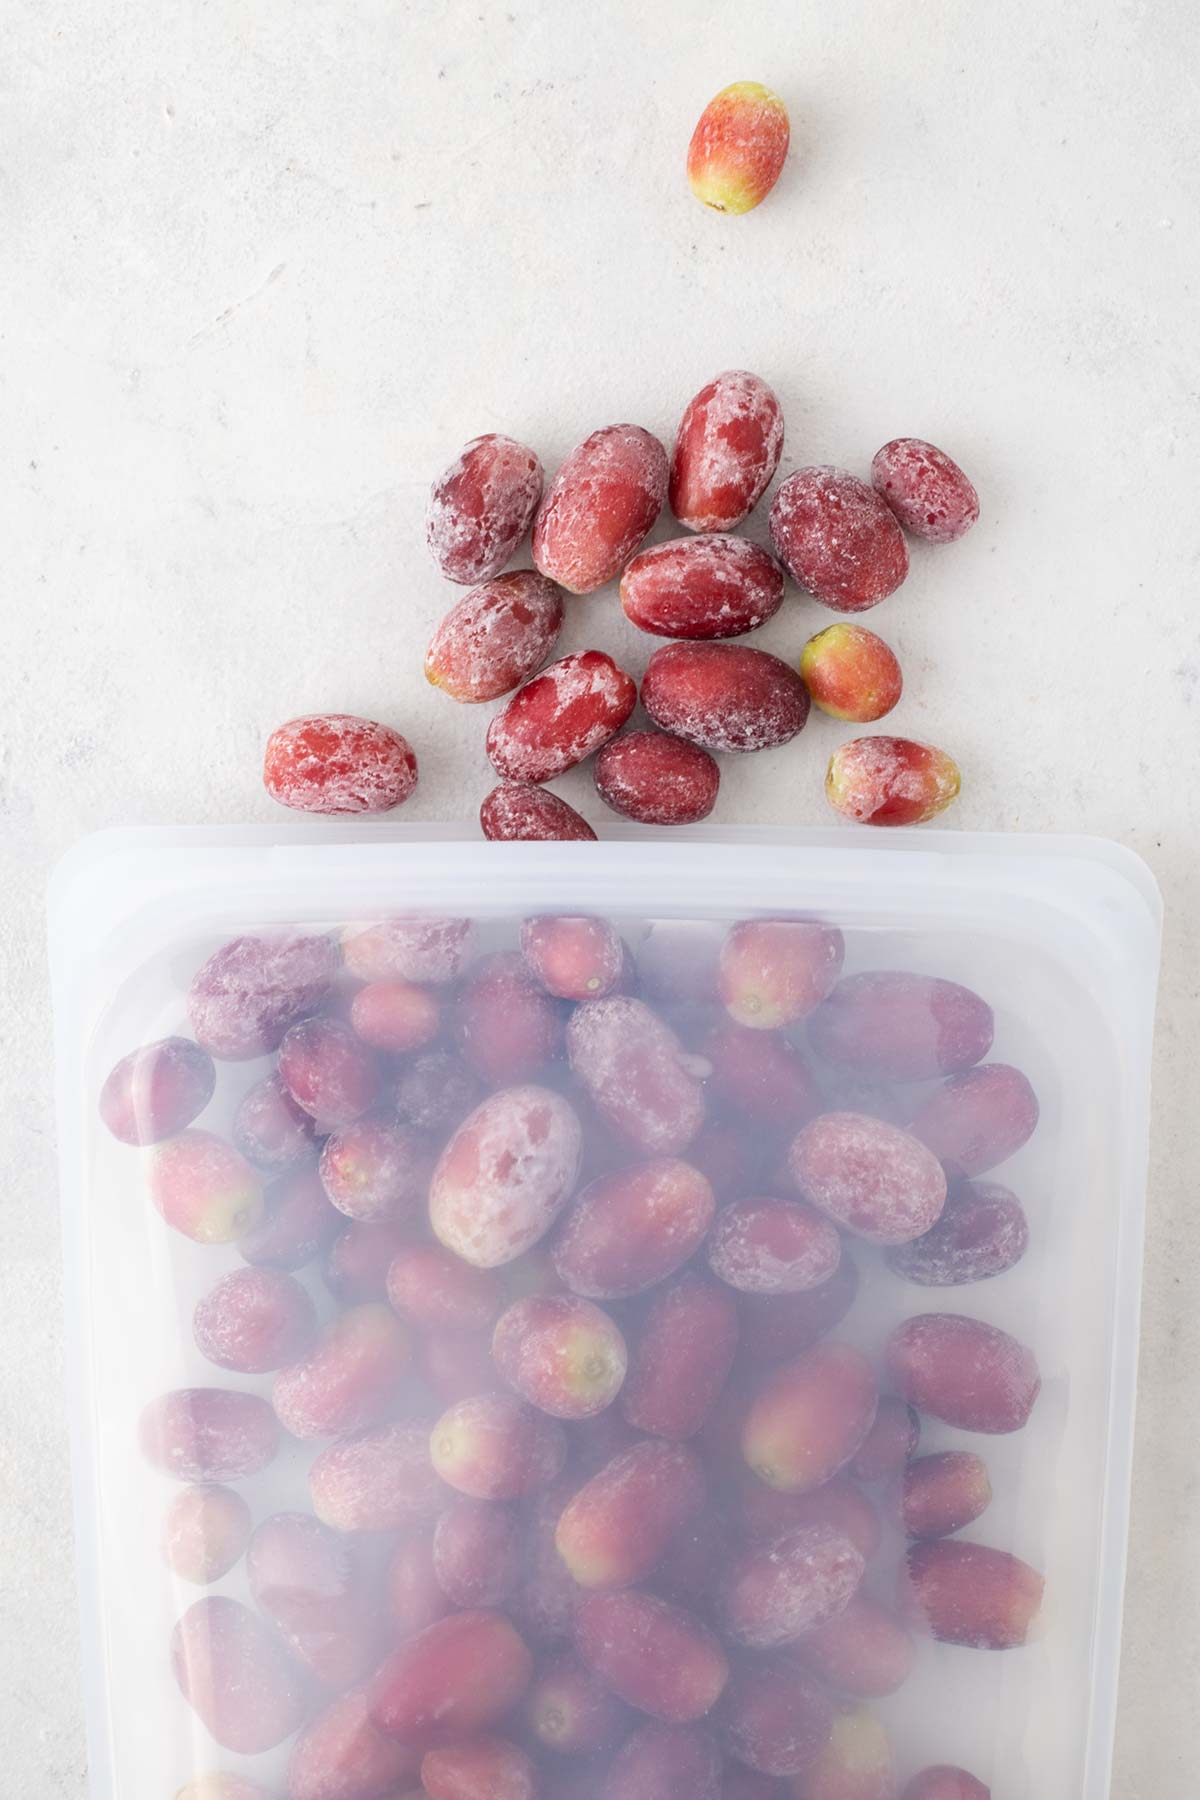 Frozen grapes in a silicone bag.